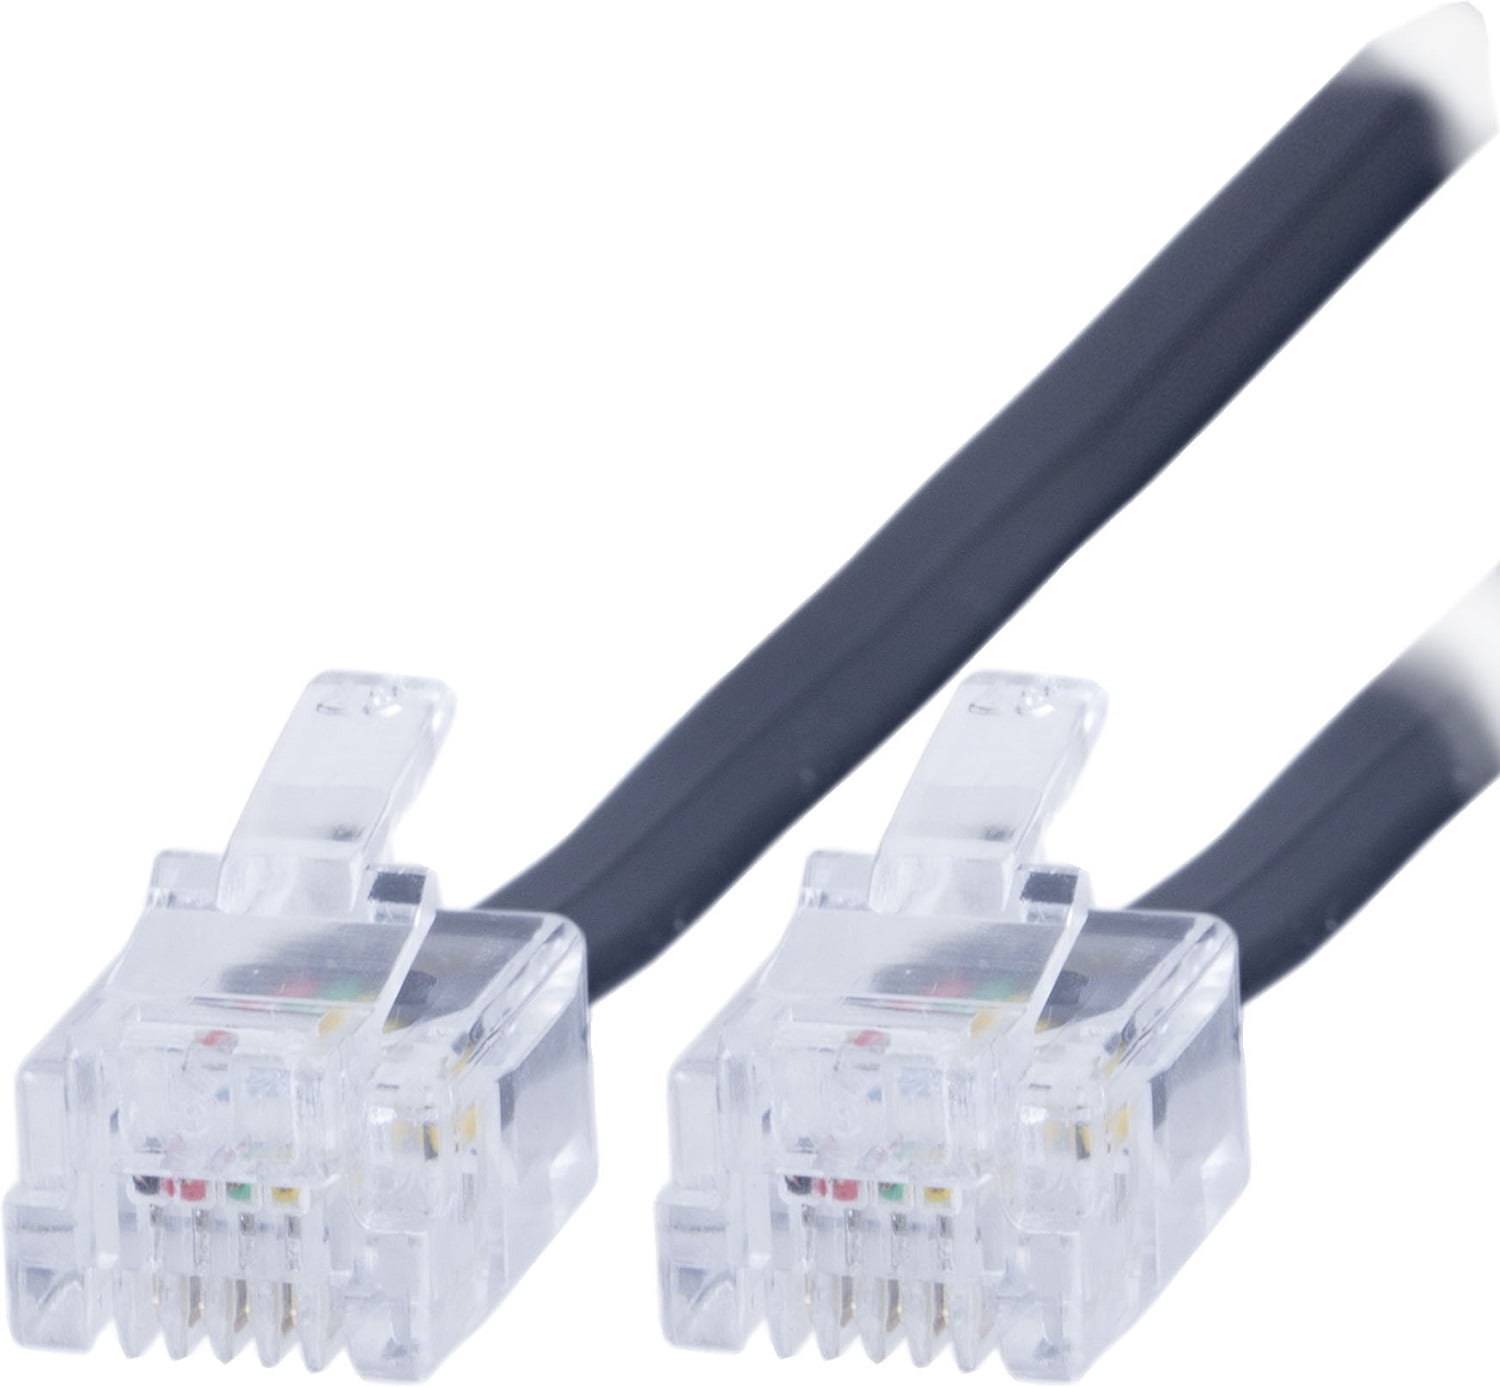 Straight Details about   BT Telephone Extension Cable Lead Fax  Modem White Phone Line 